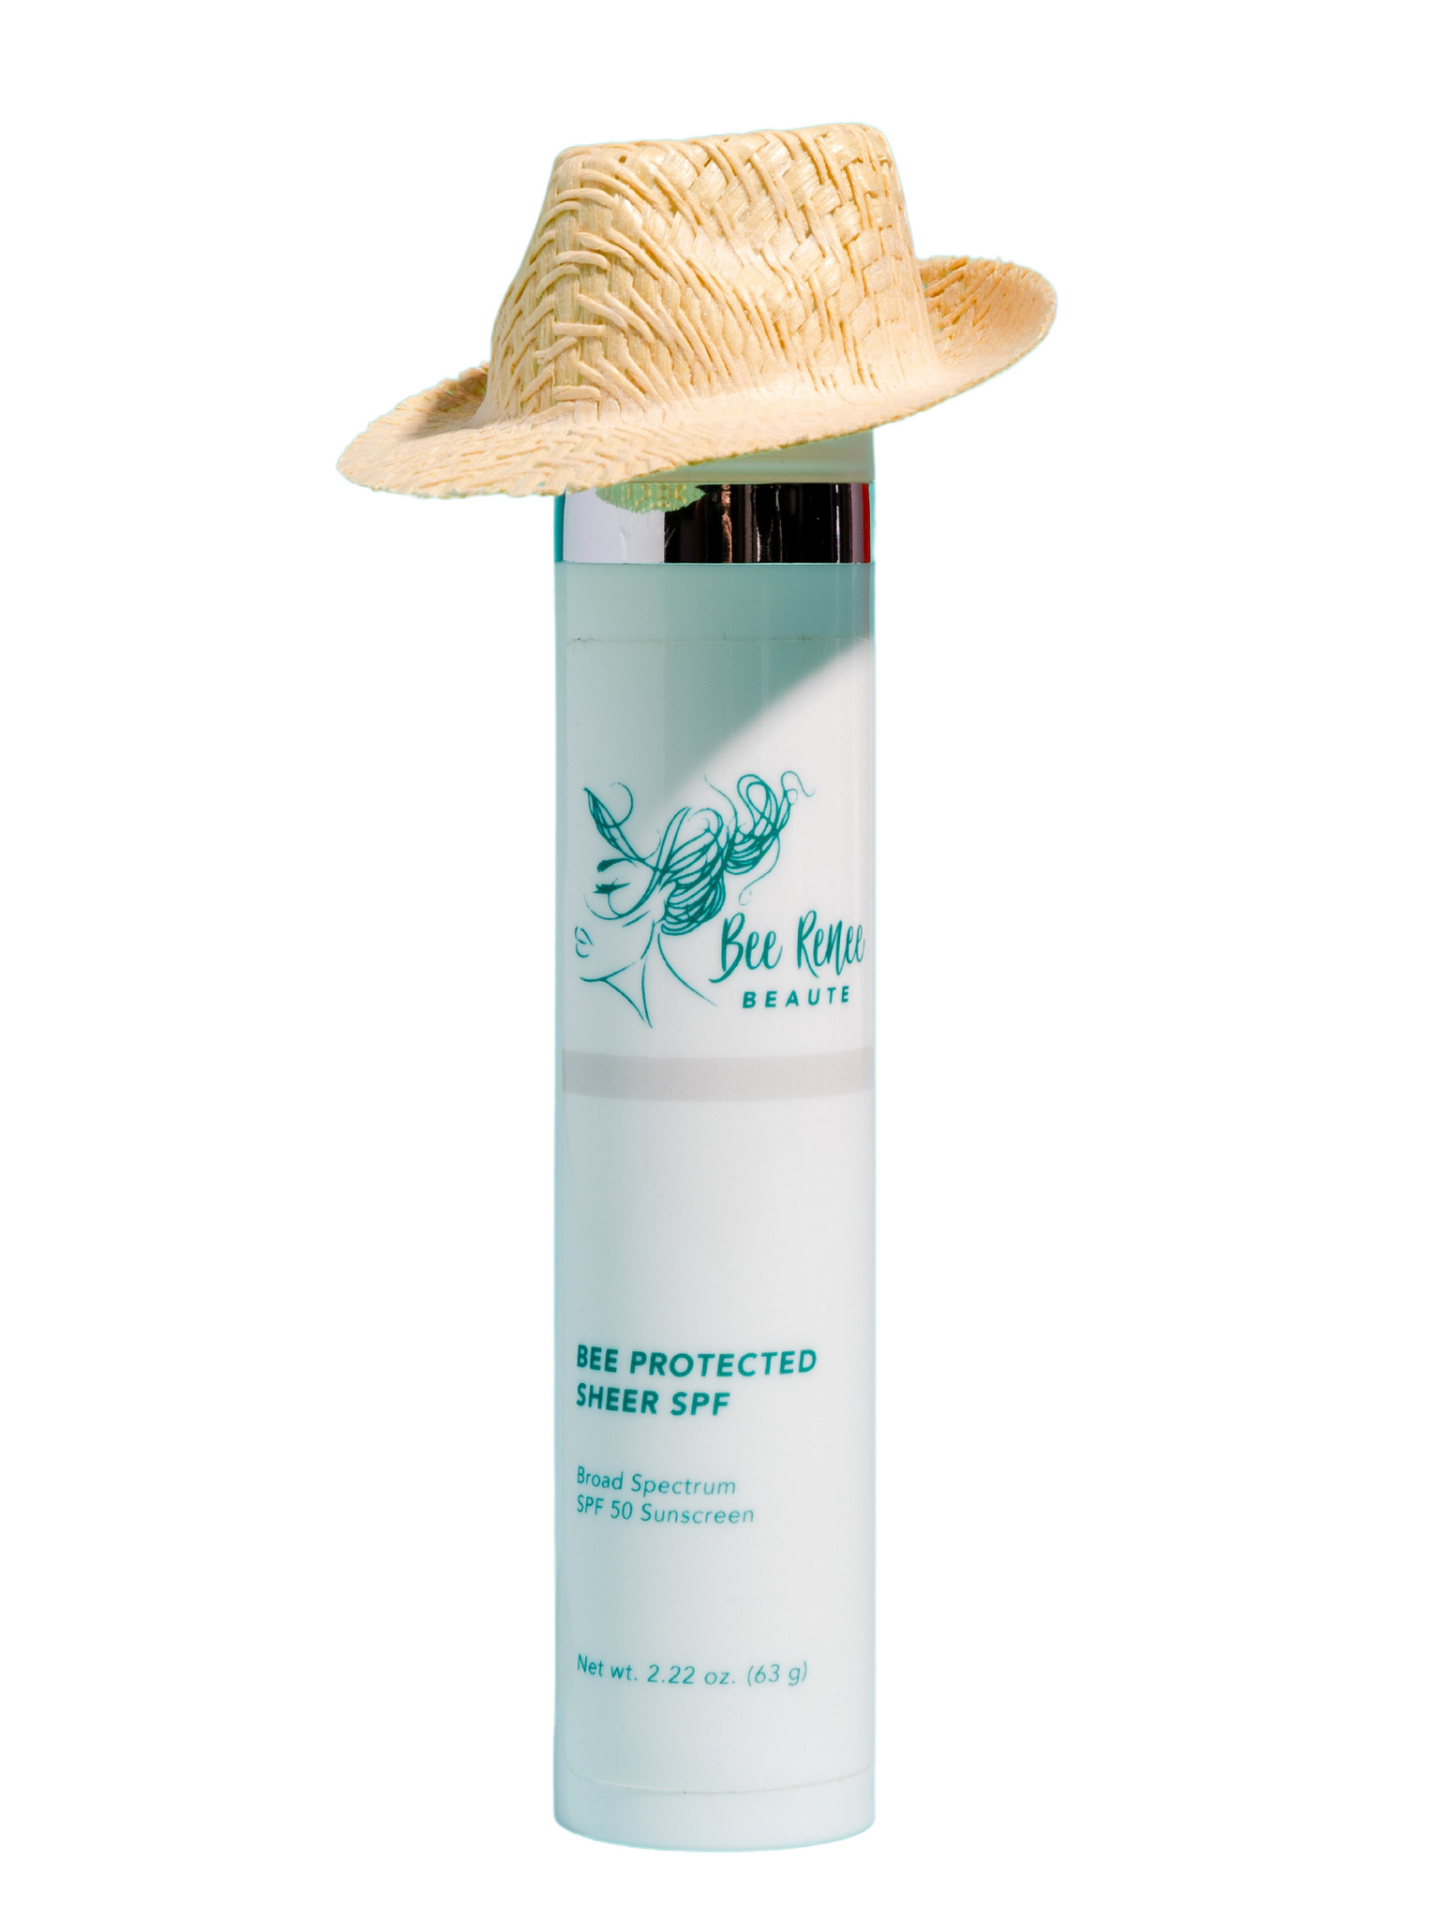 Bee Protected Spf 50+ (Sunscreen)